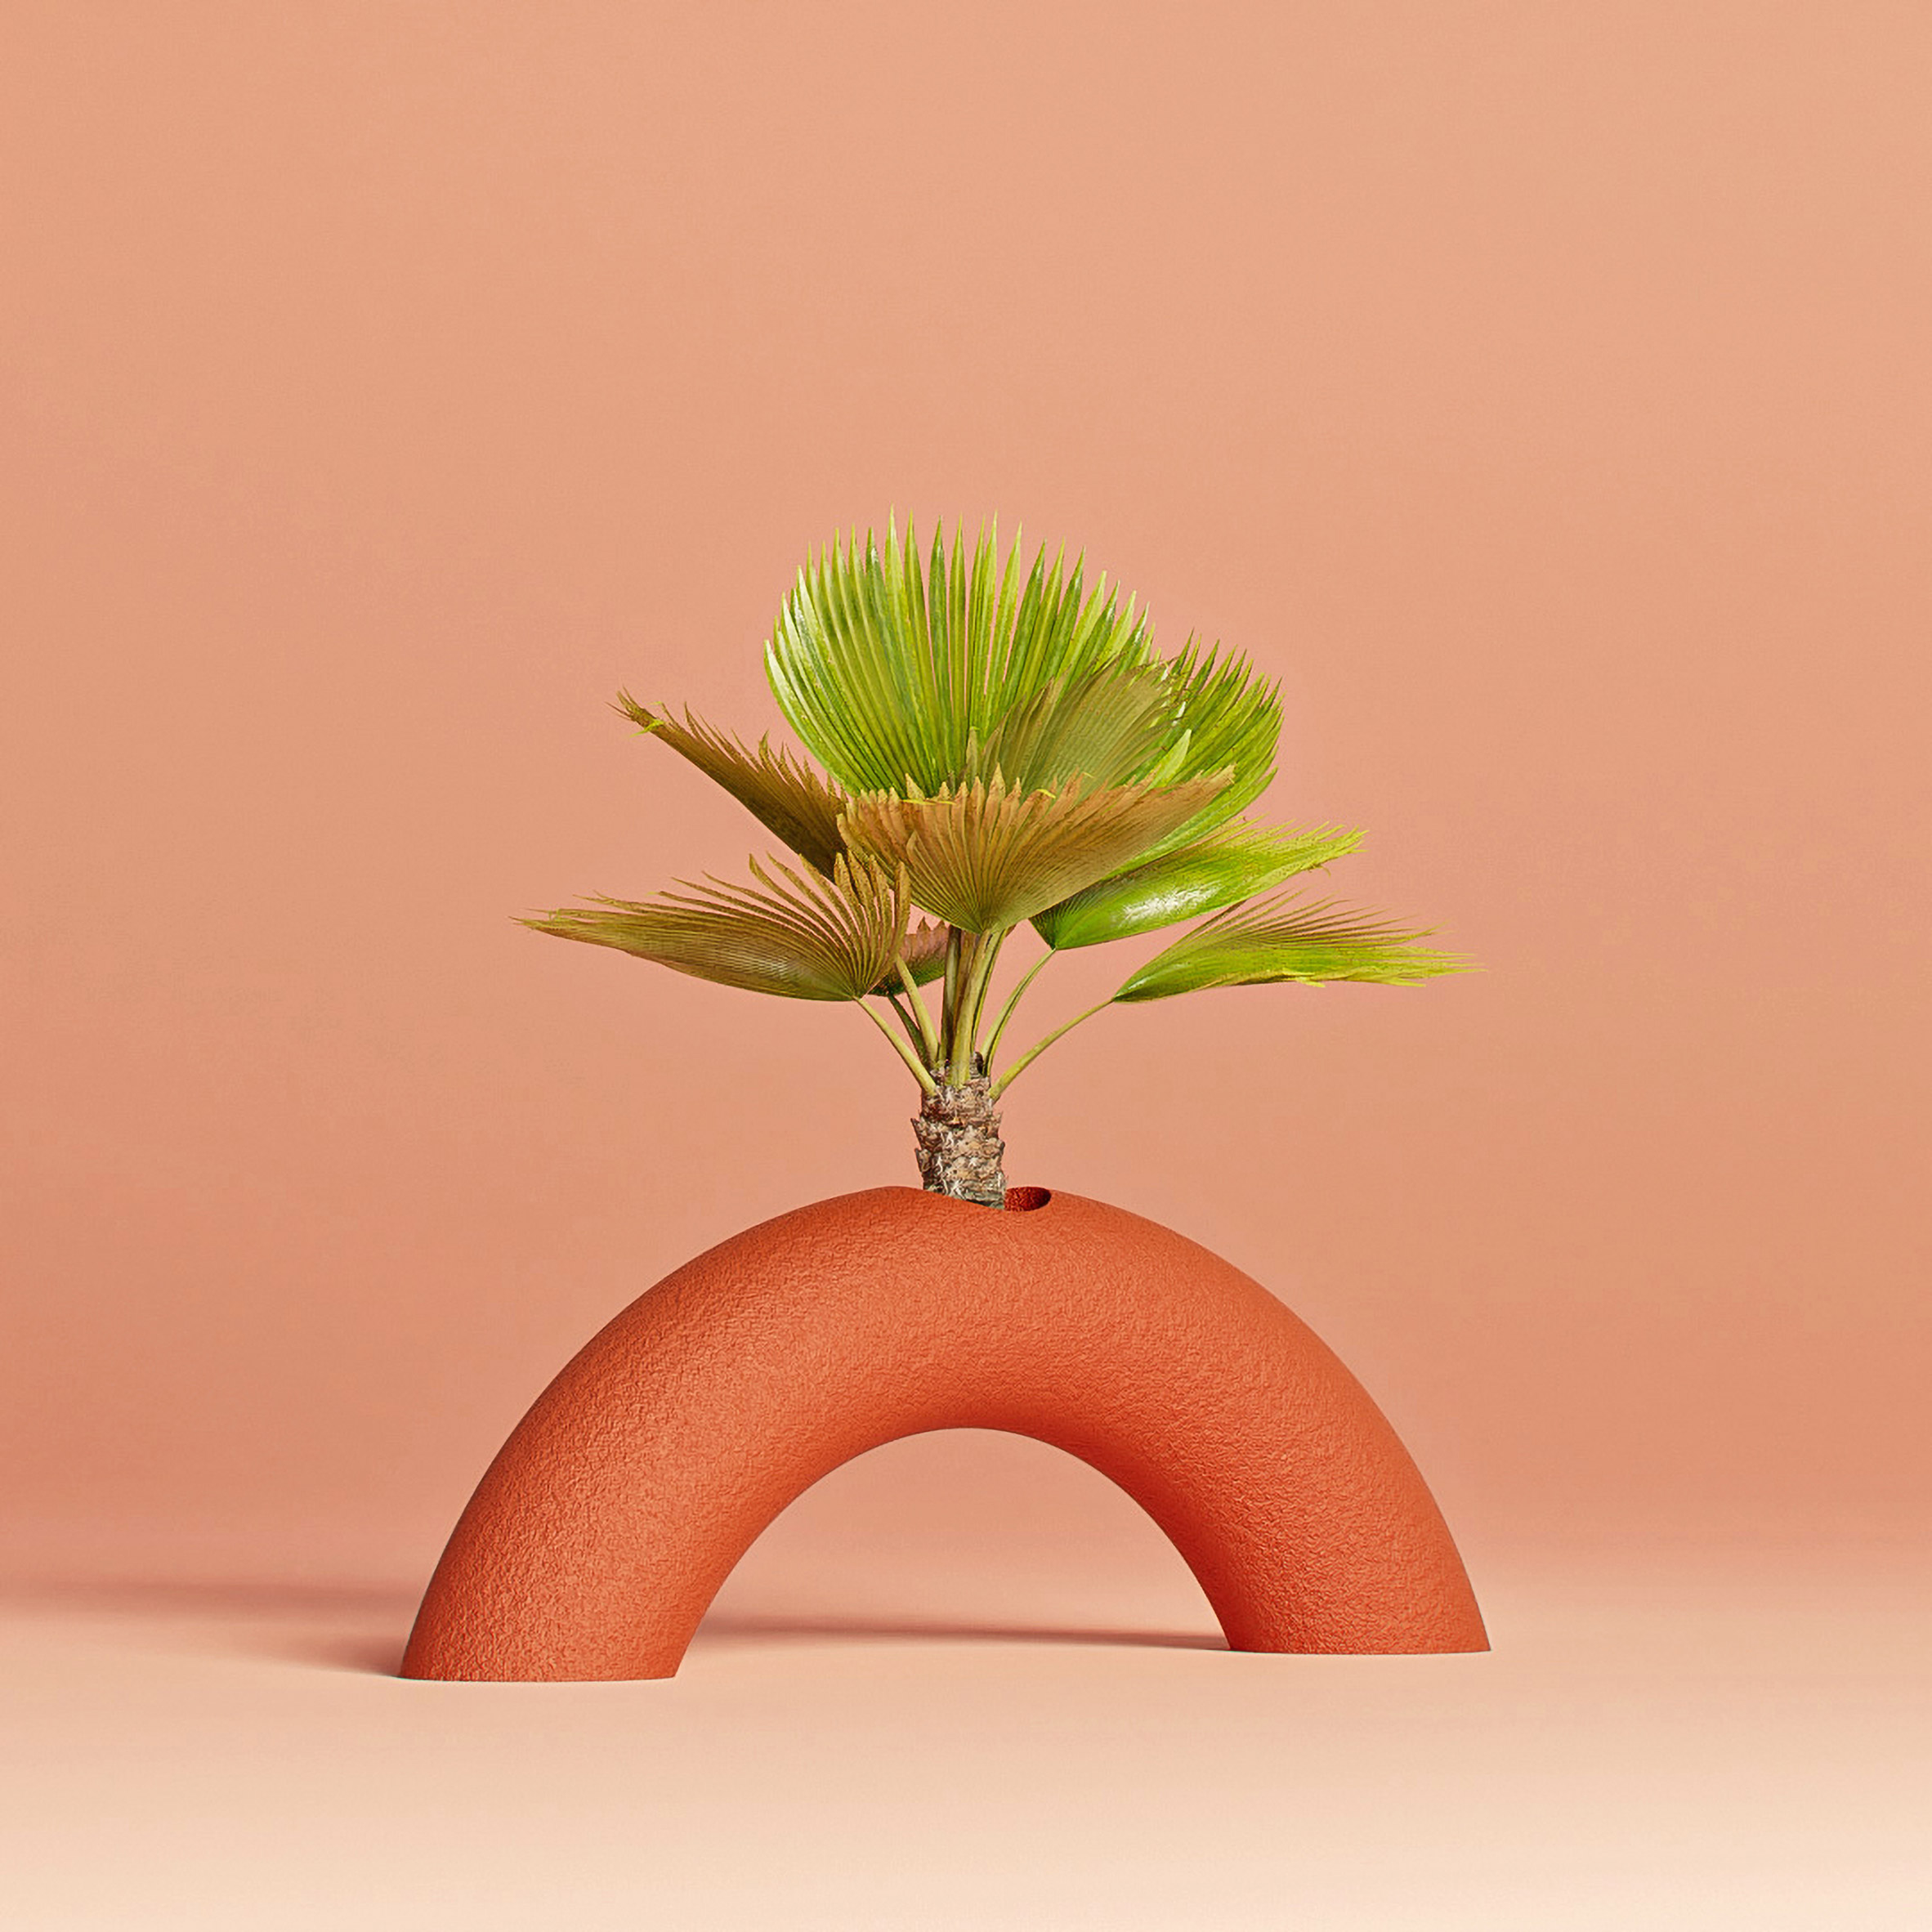 Plants protrude from the objects by Studio Hai